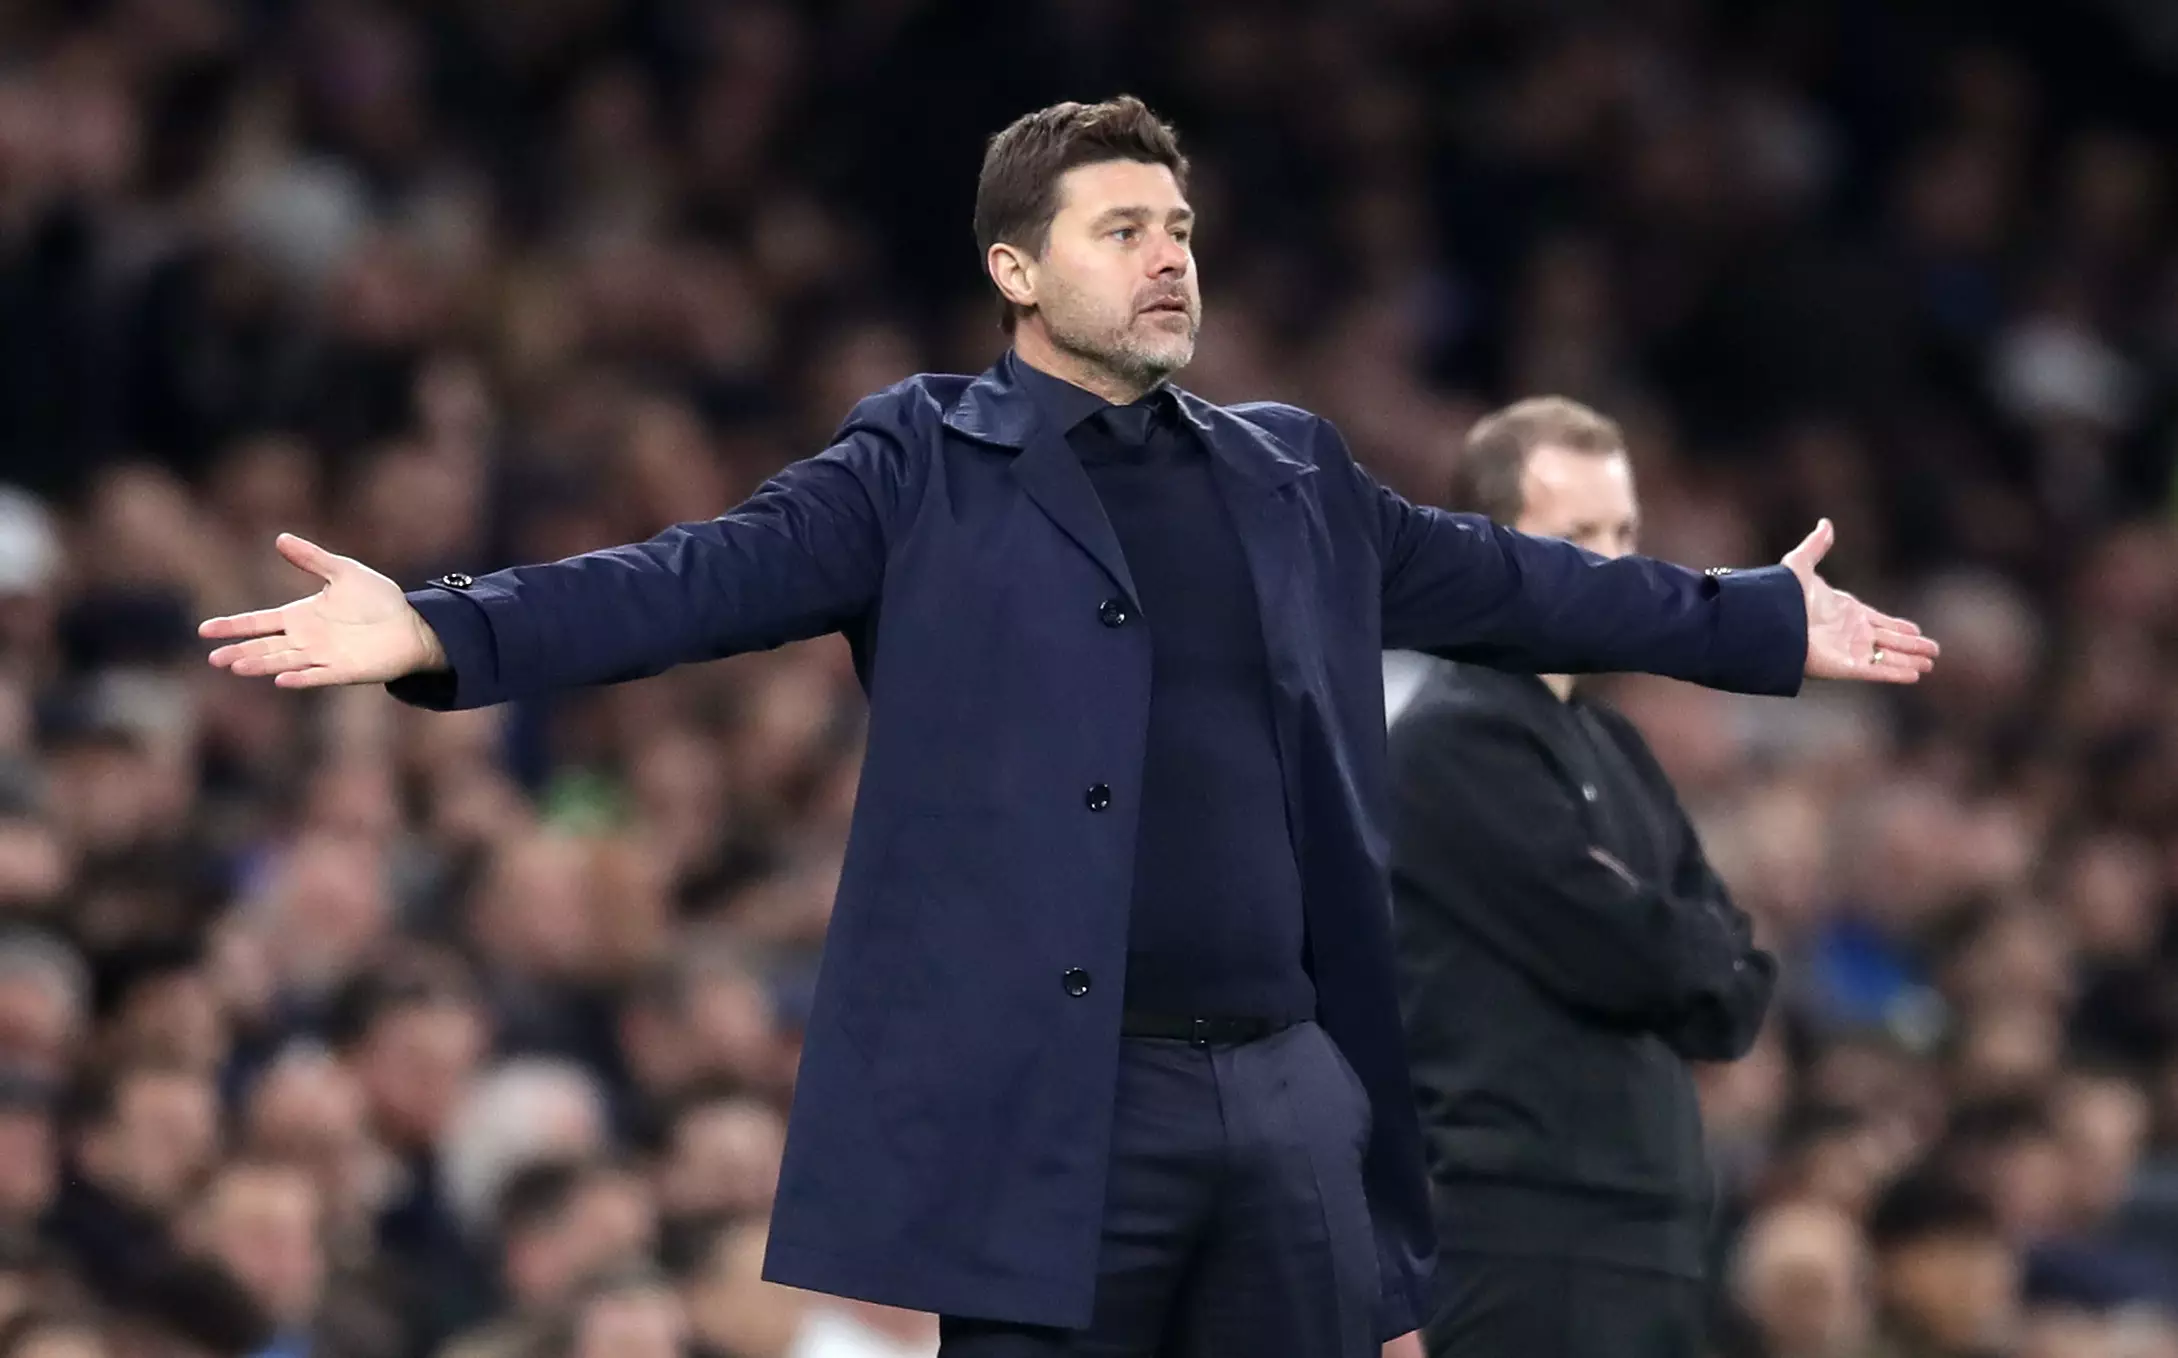 Pochettino has also been linked to Manchester United, Juventus and Bayern Munich. Image: PA Images